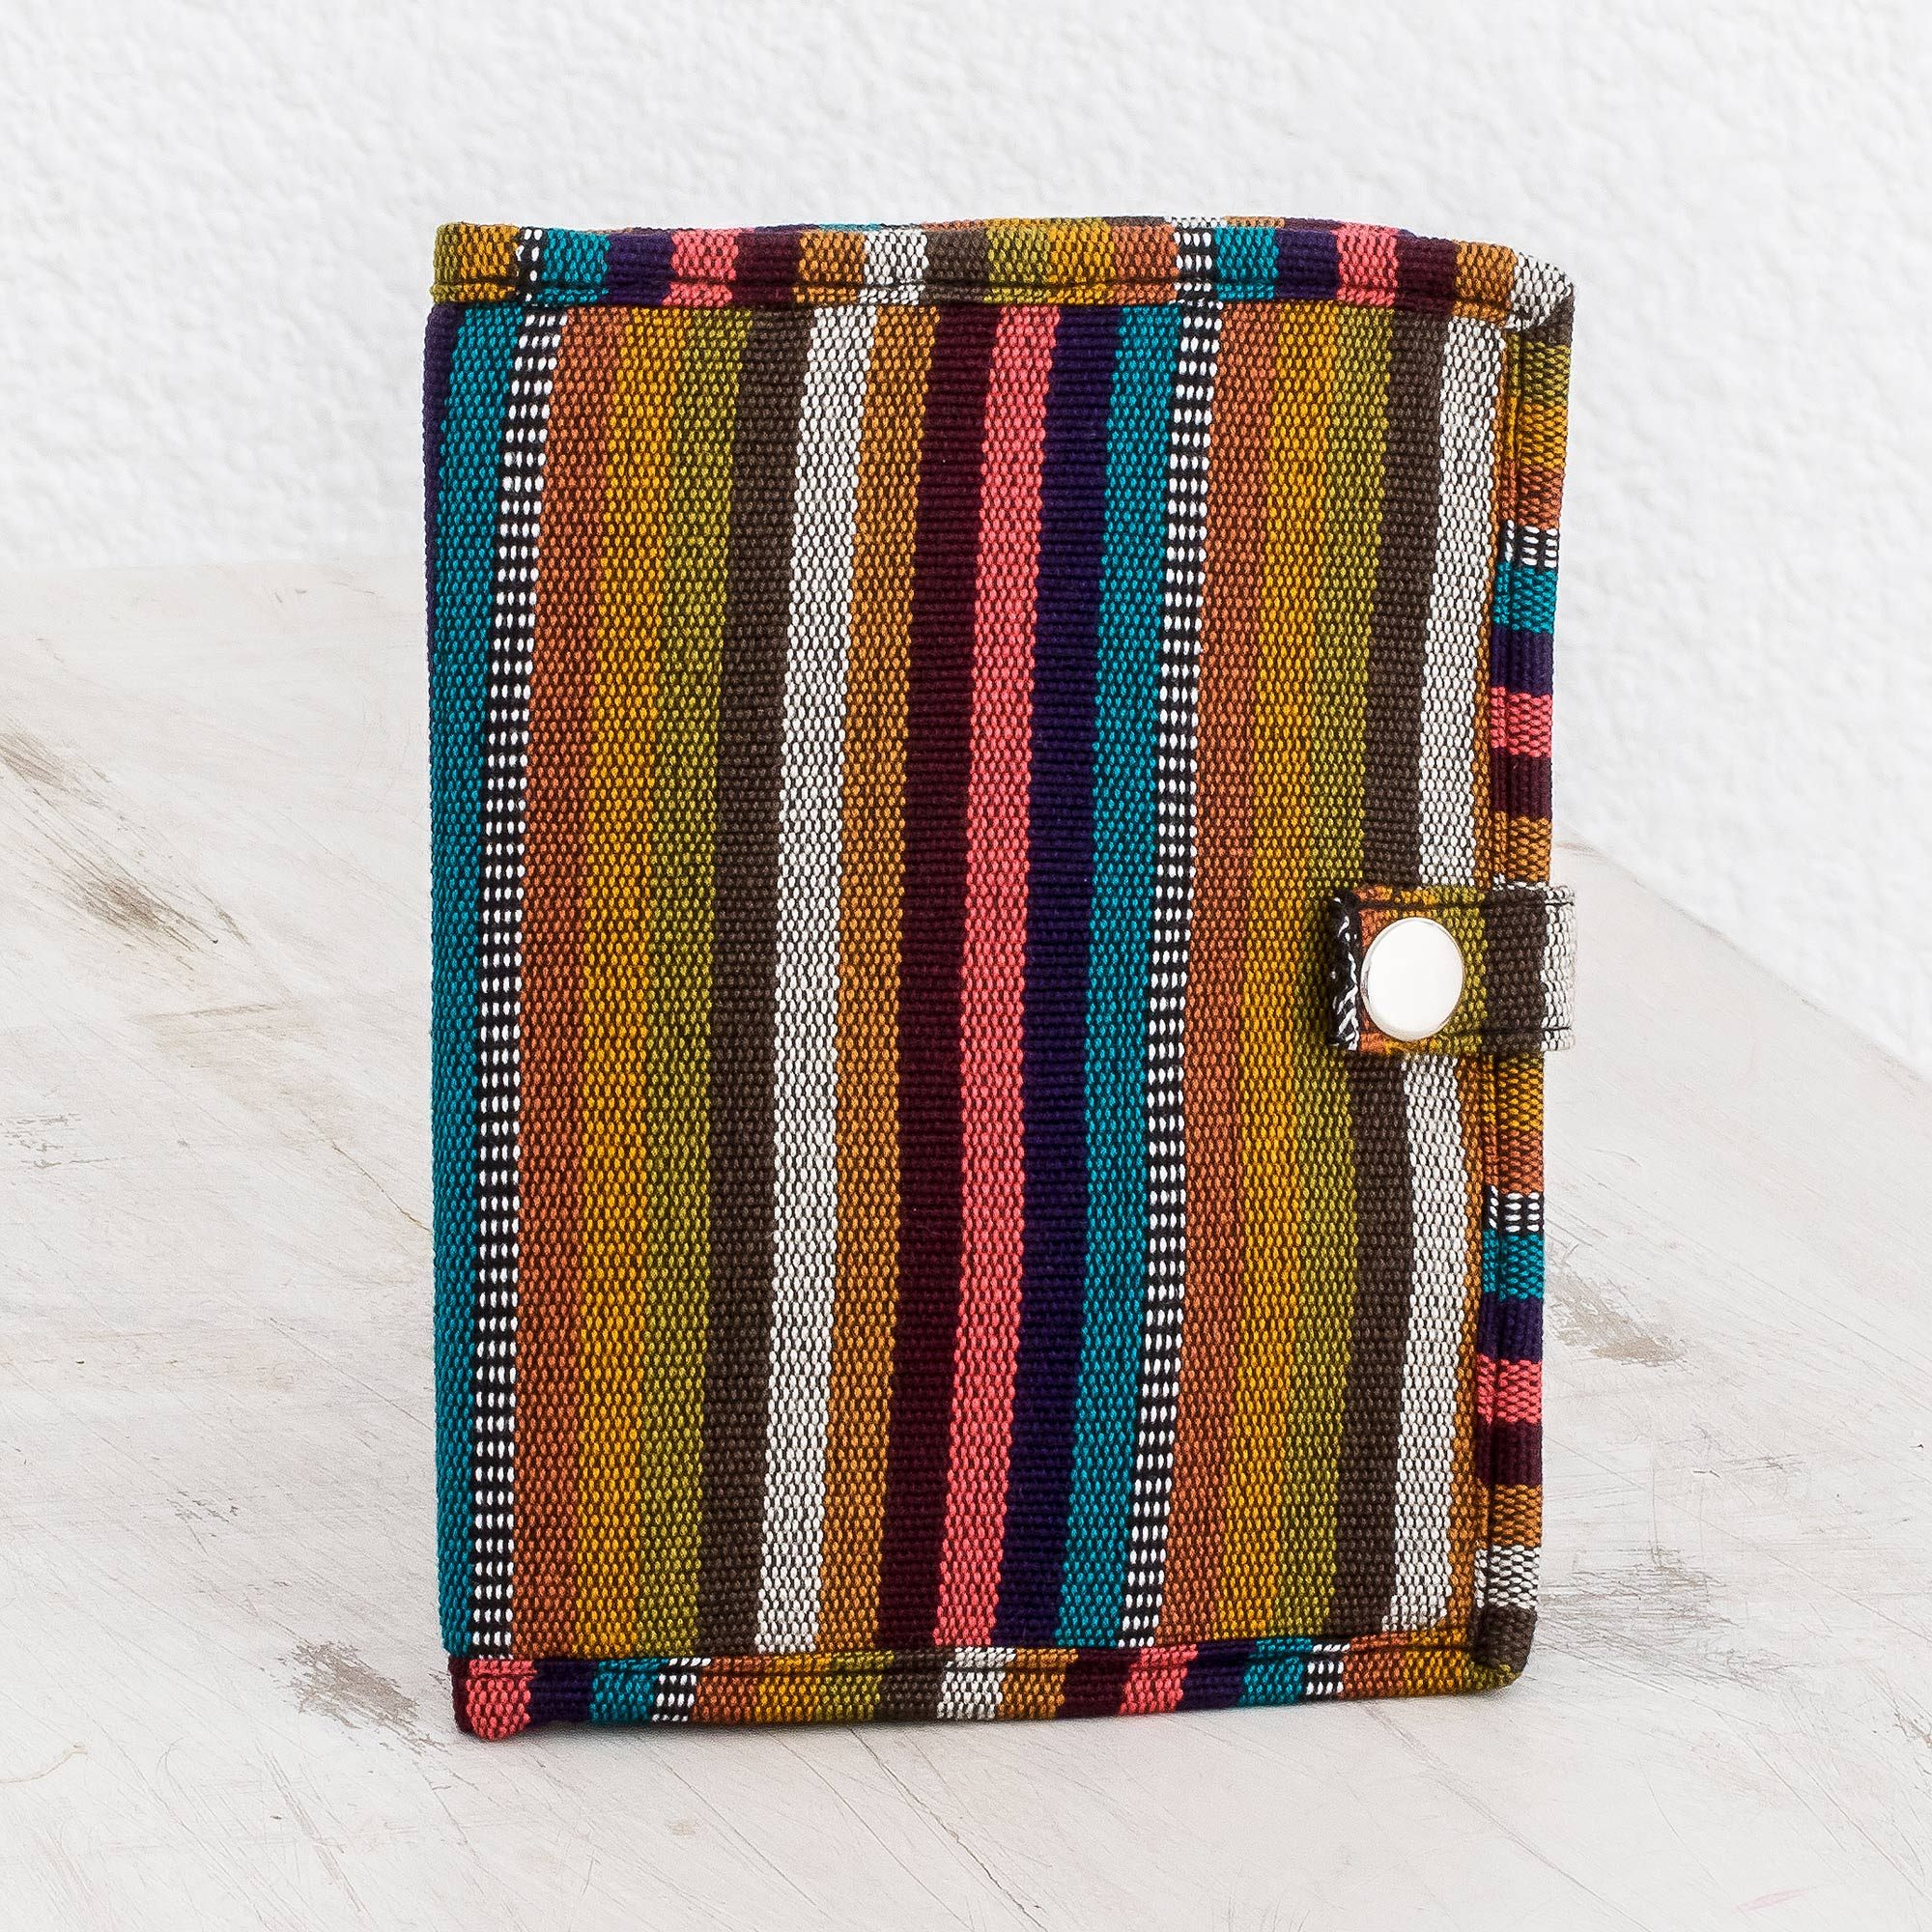 Handwoven Striped Cotton Passport Wallet from Guatemala - Exploring ...